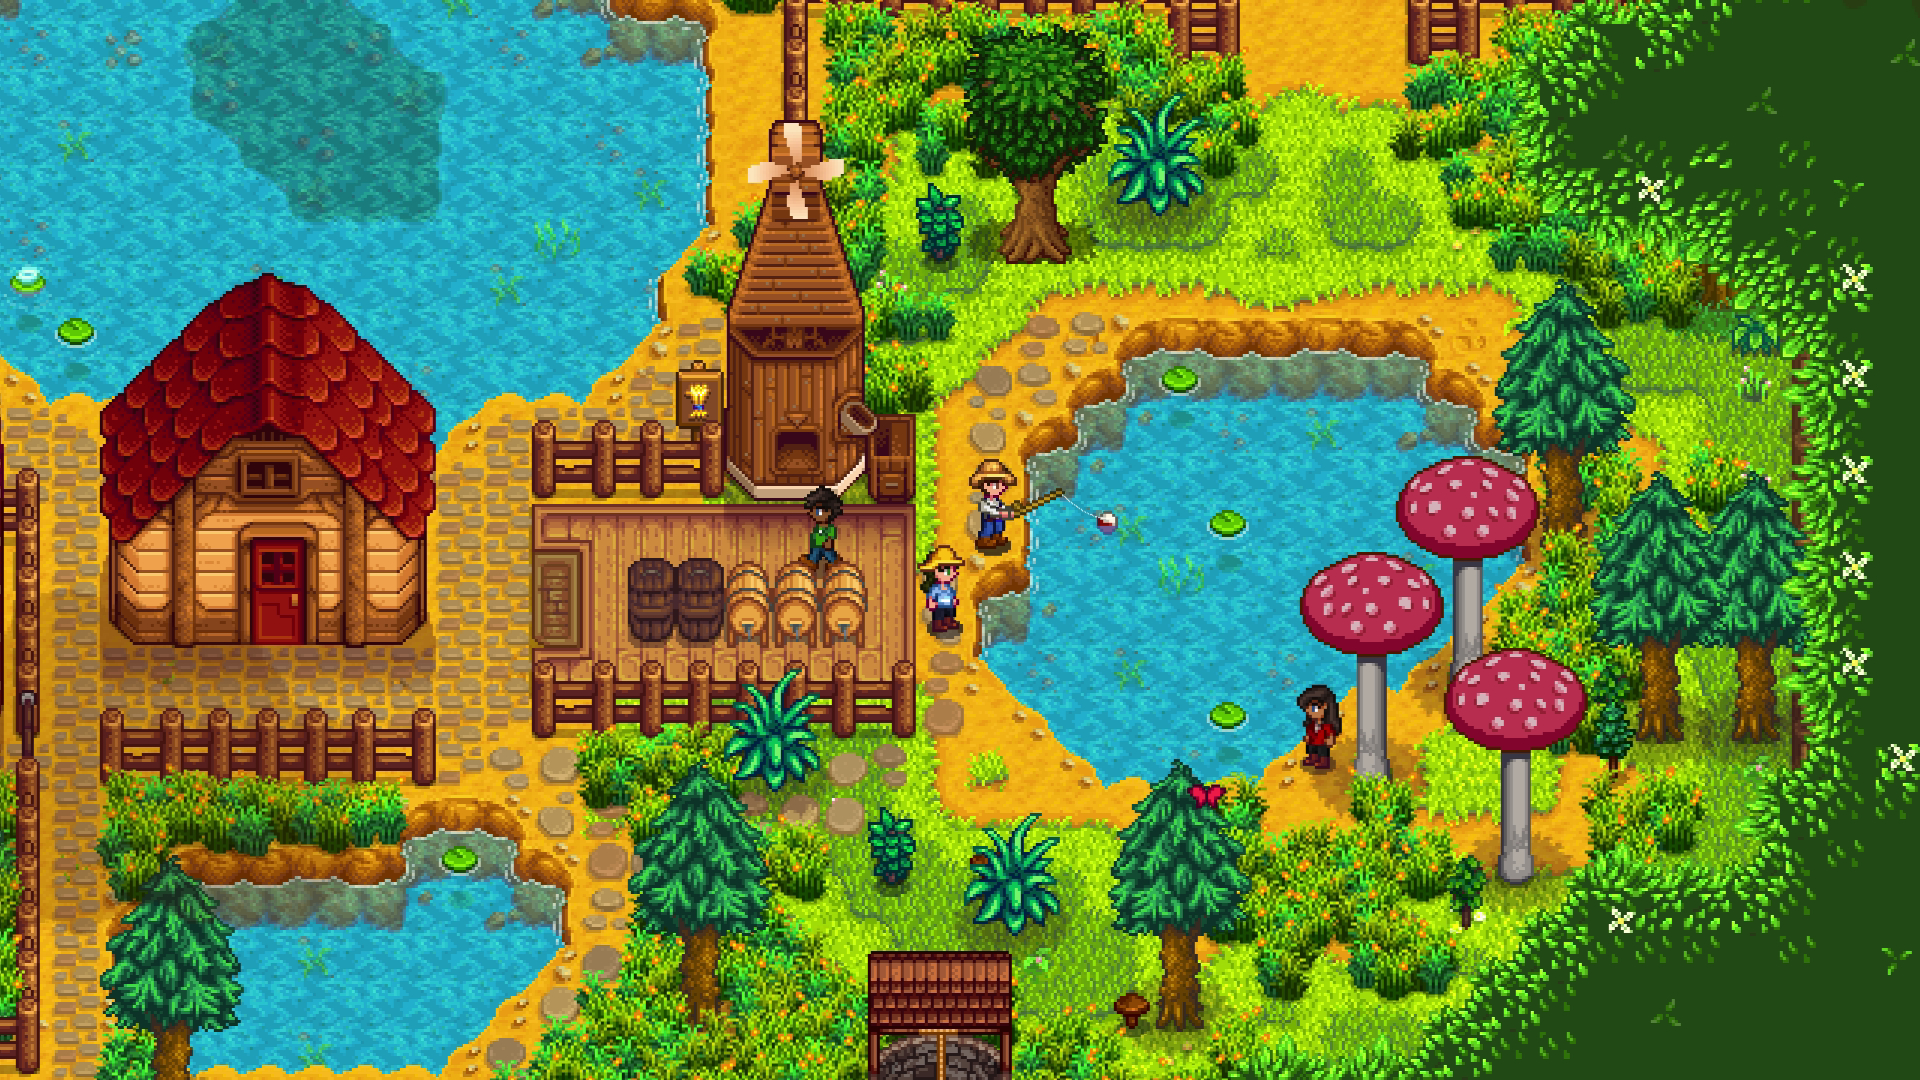 Players fish together in Stardew Valley's multiplayer mode